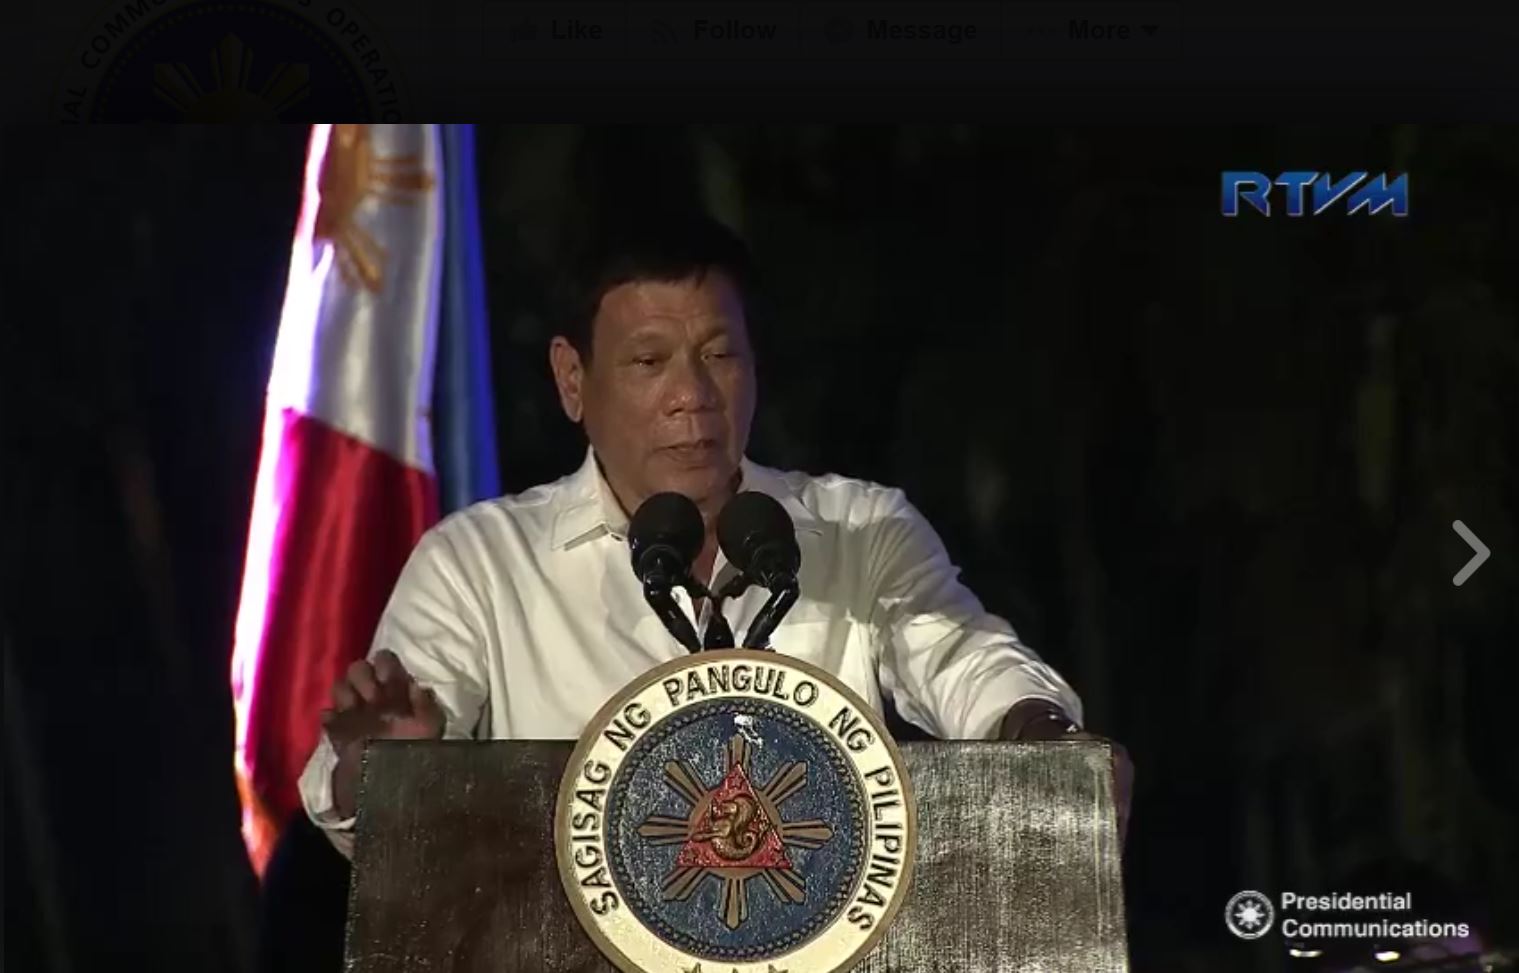 President Duterte speaking at the Palace grounds in a ceremony Monday night (December 5) (Photo grabbed from RTVM video)